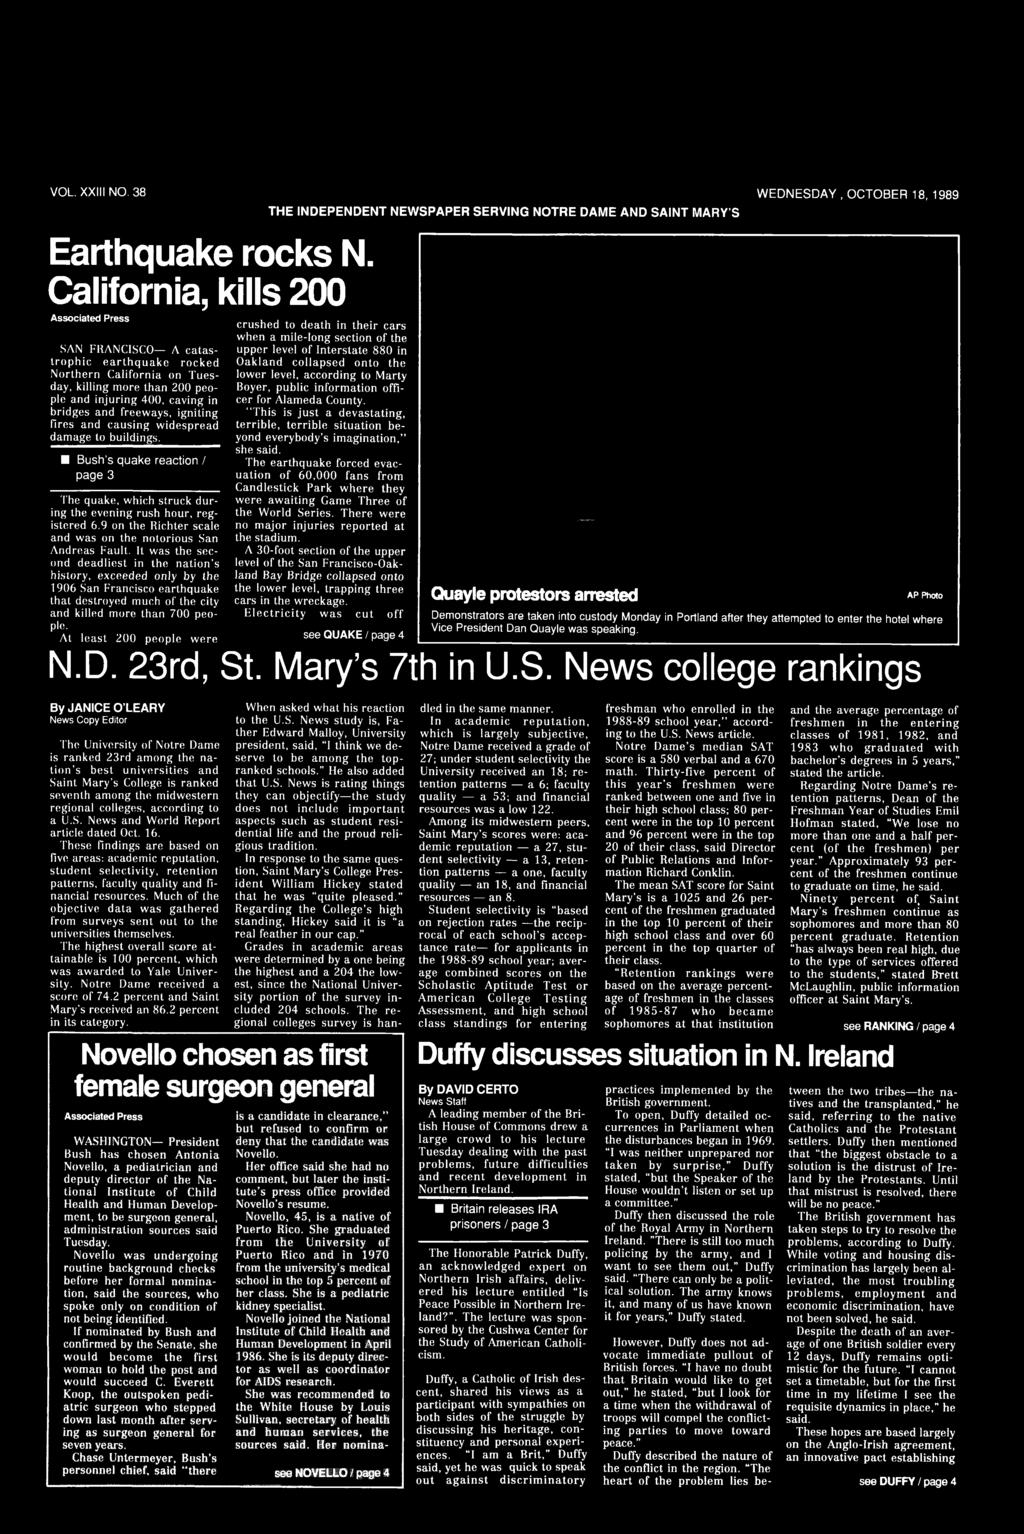 At least 200 people were THE NDEPENDENT NEWSPAPER SERVNG NOTRE DAME AND SANT MARY S crushed to death n ther cars when a mle-long secton of the upper level of nterstate 880 n Oakland collapsed onto